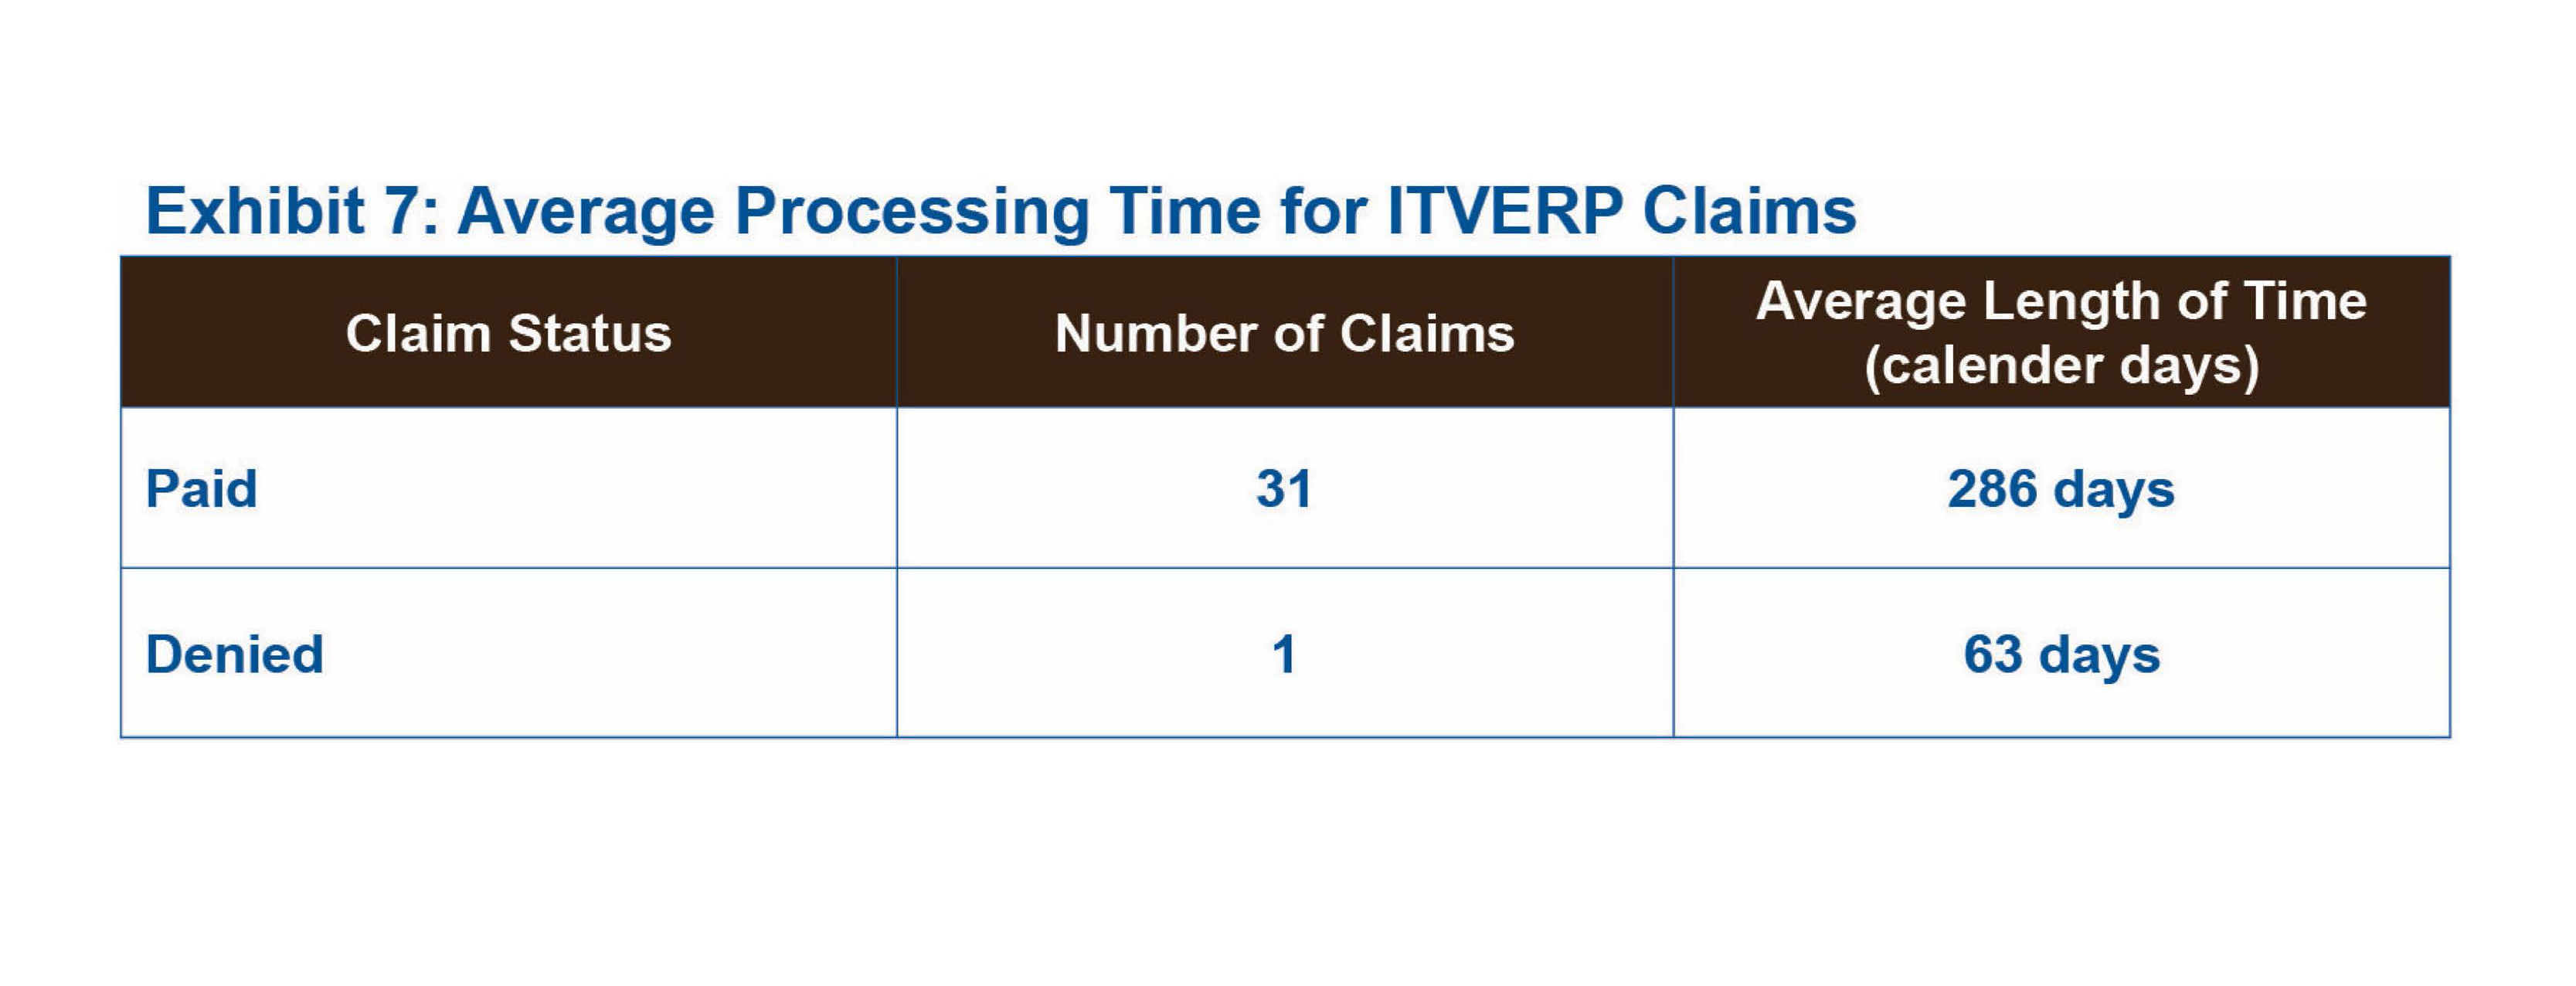 Exhibit 7: Average Processing Time for ITVERP Claims